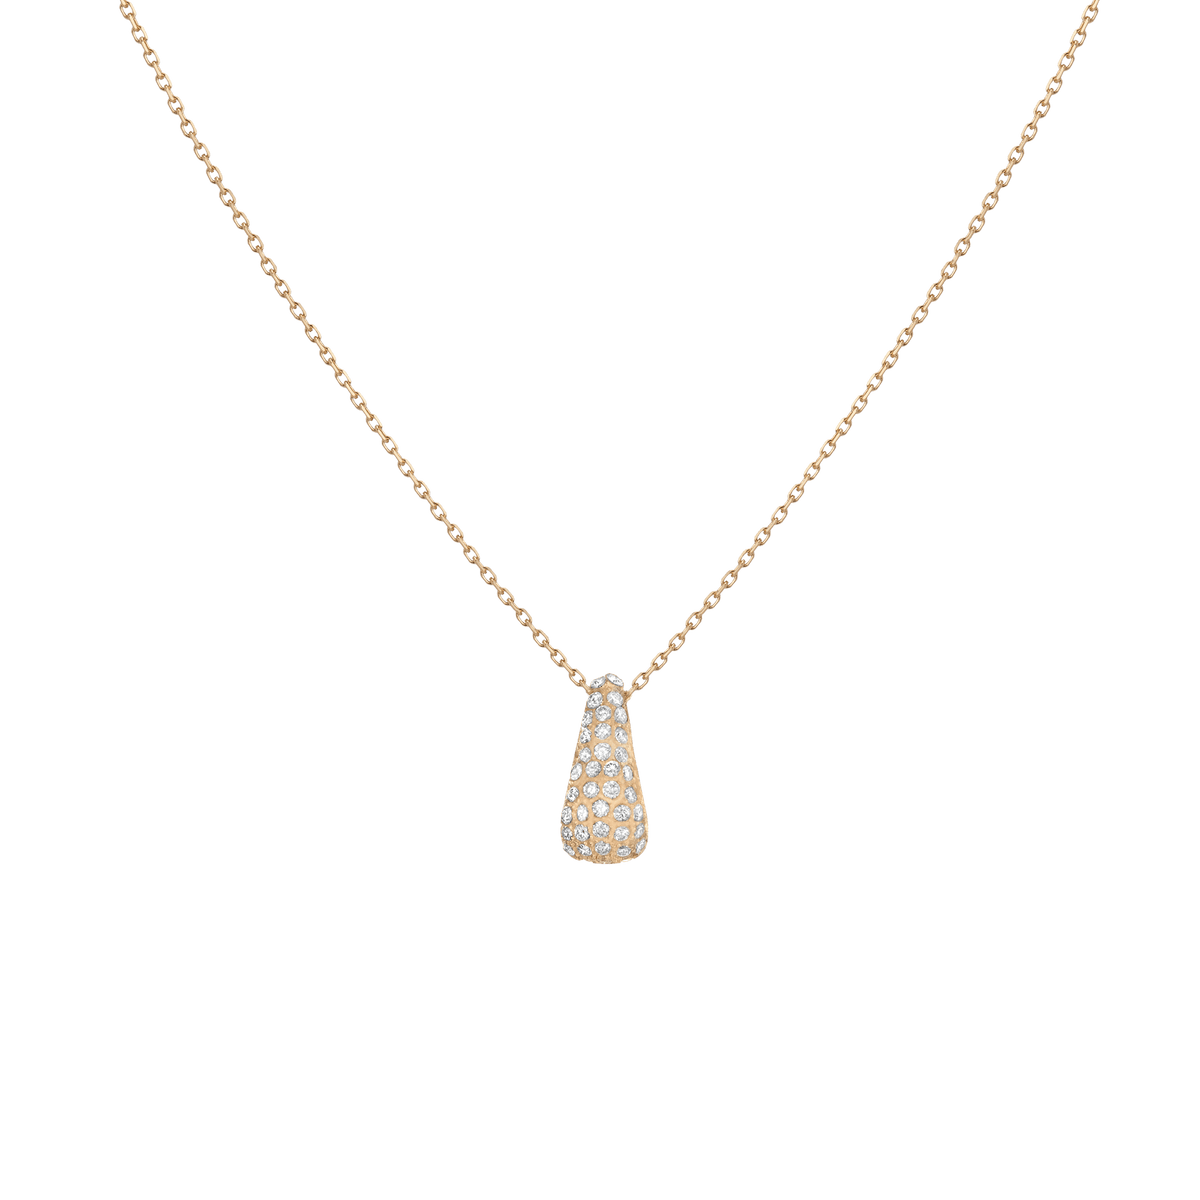 Pavé Diamond Teardrop Necklace in Yellow, Rose or White Gold